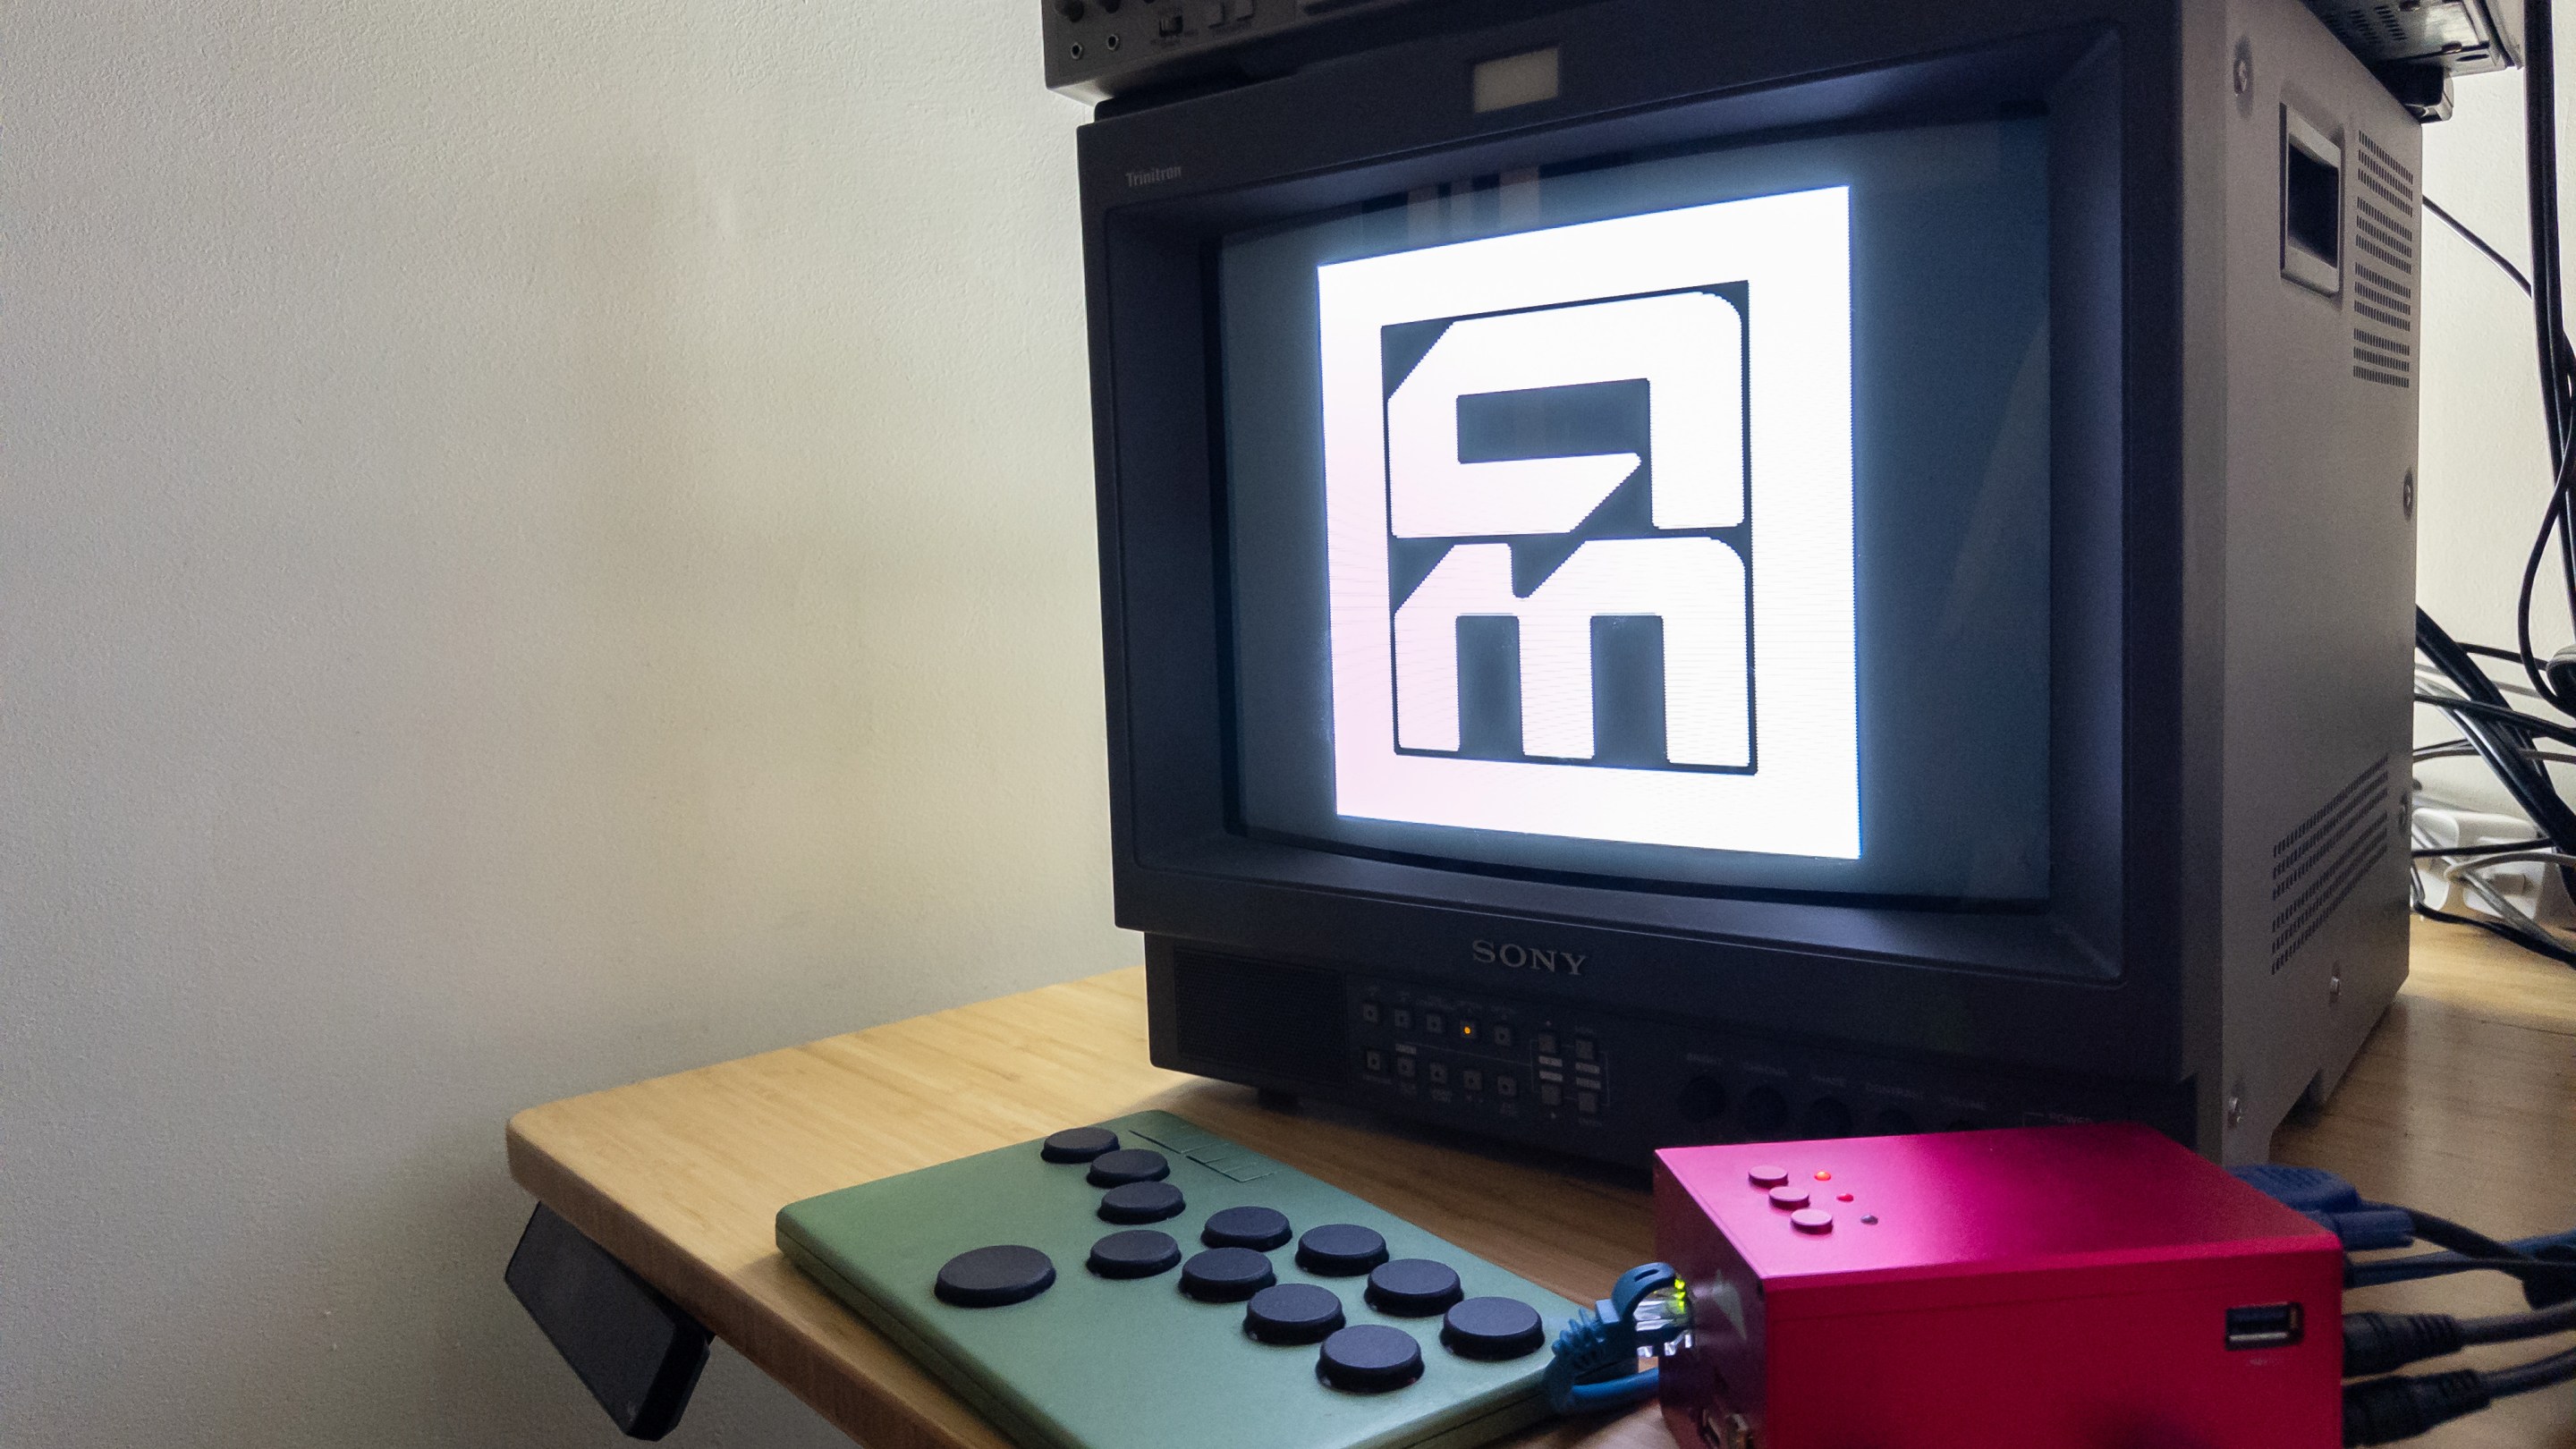 A MiSTer and Flatbox controller streaming the Aftermath logo on to a CRT.